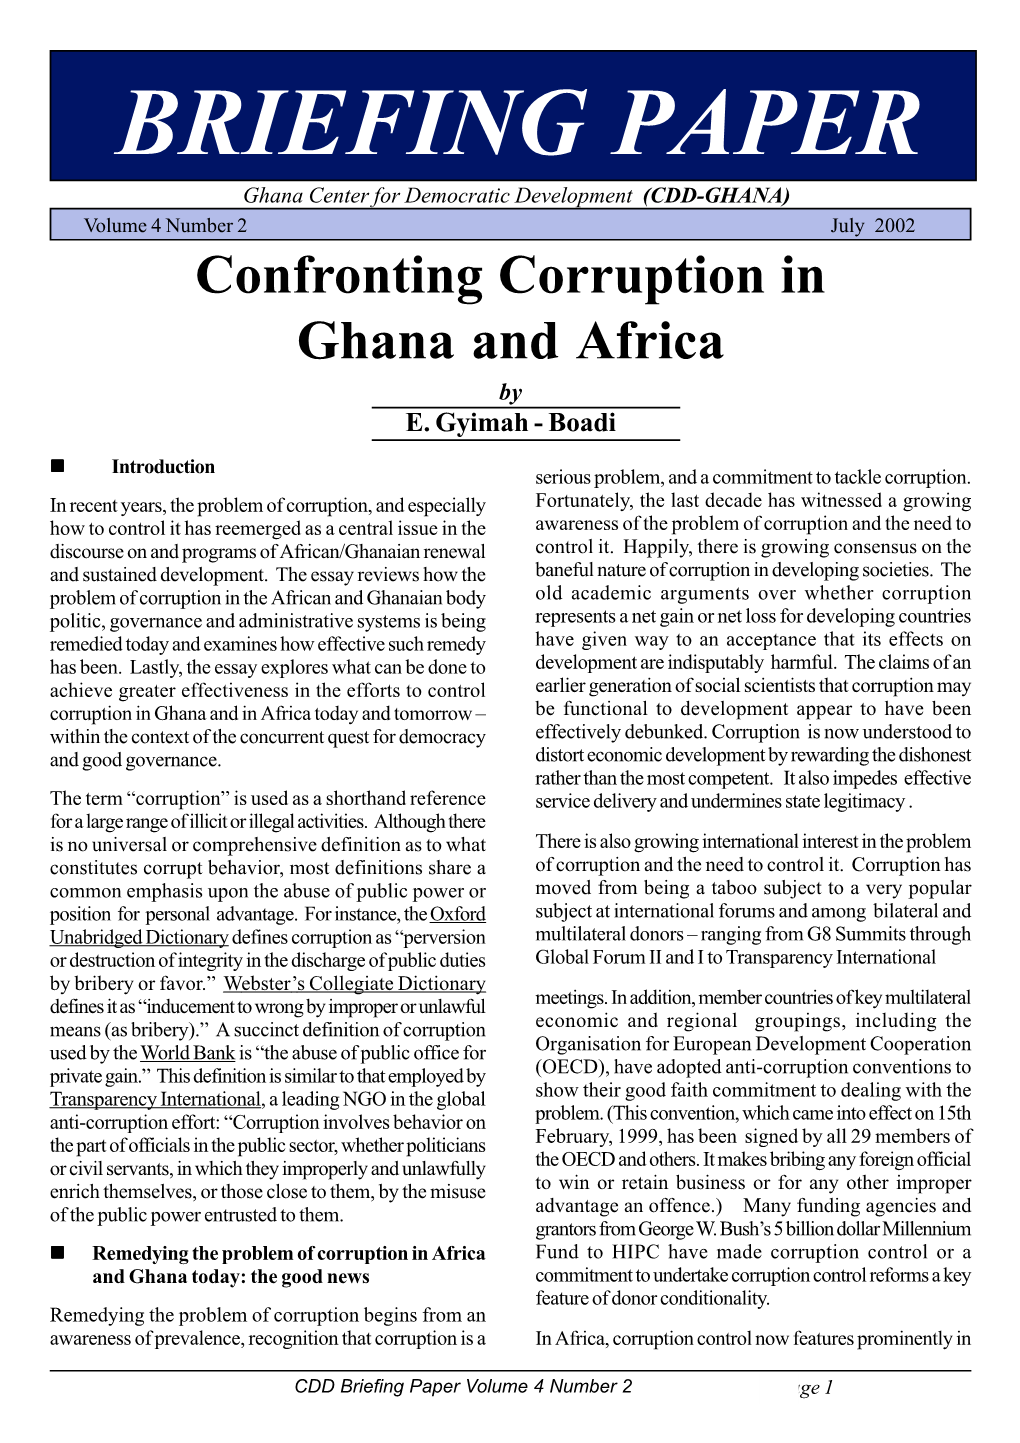 Confronting Corruption in Ghana and Africa by E